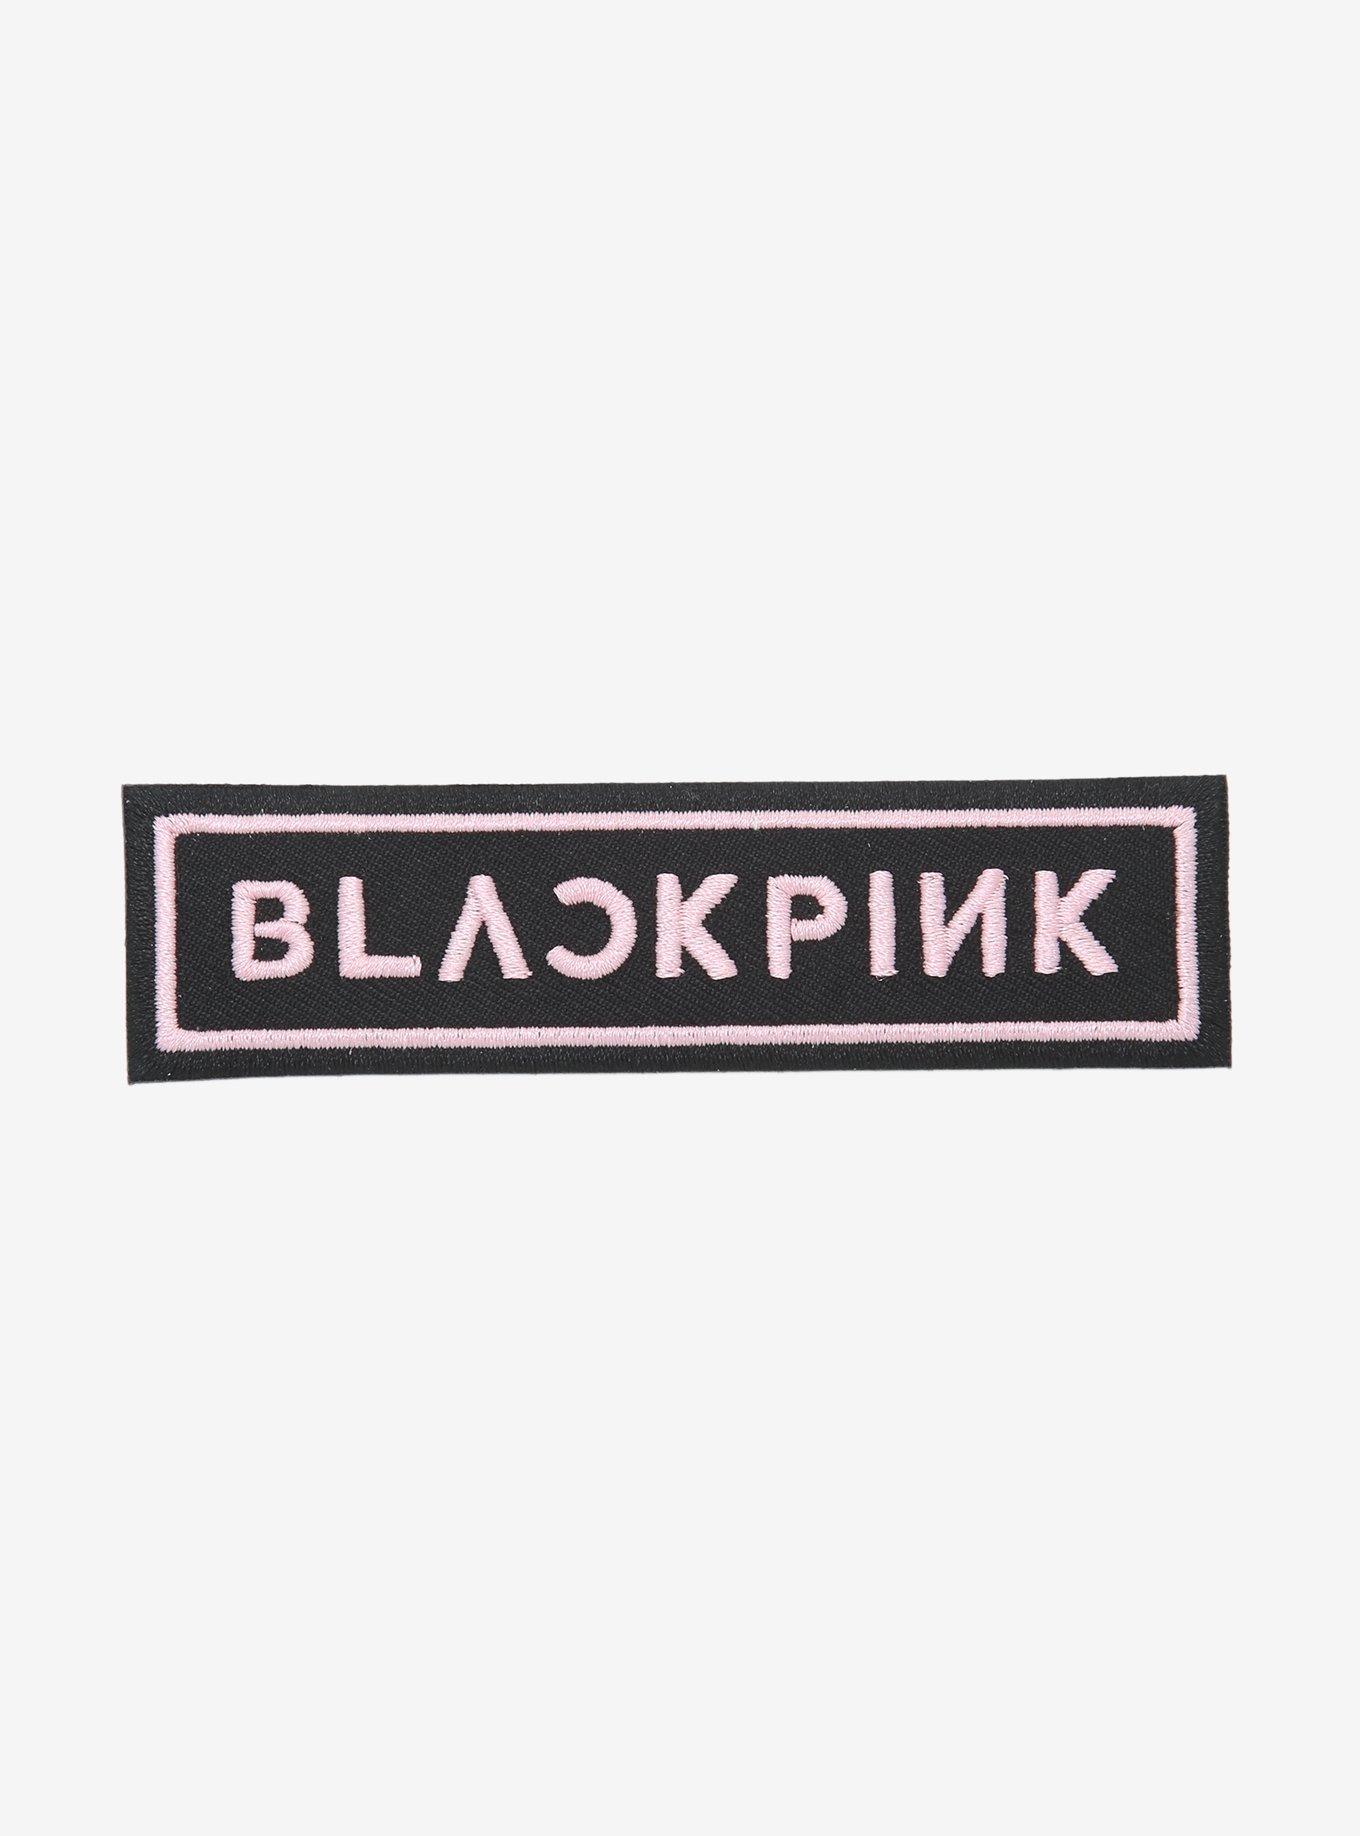 Shop The Look: Indie Fashion Labels Well-Loved By Blackpink